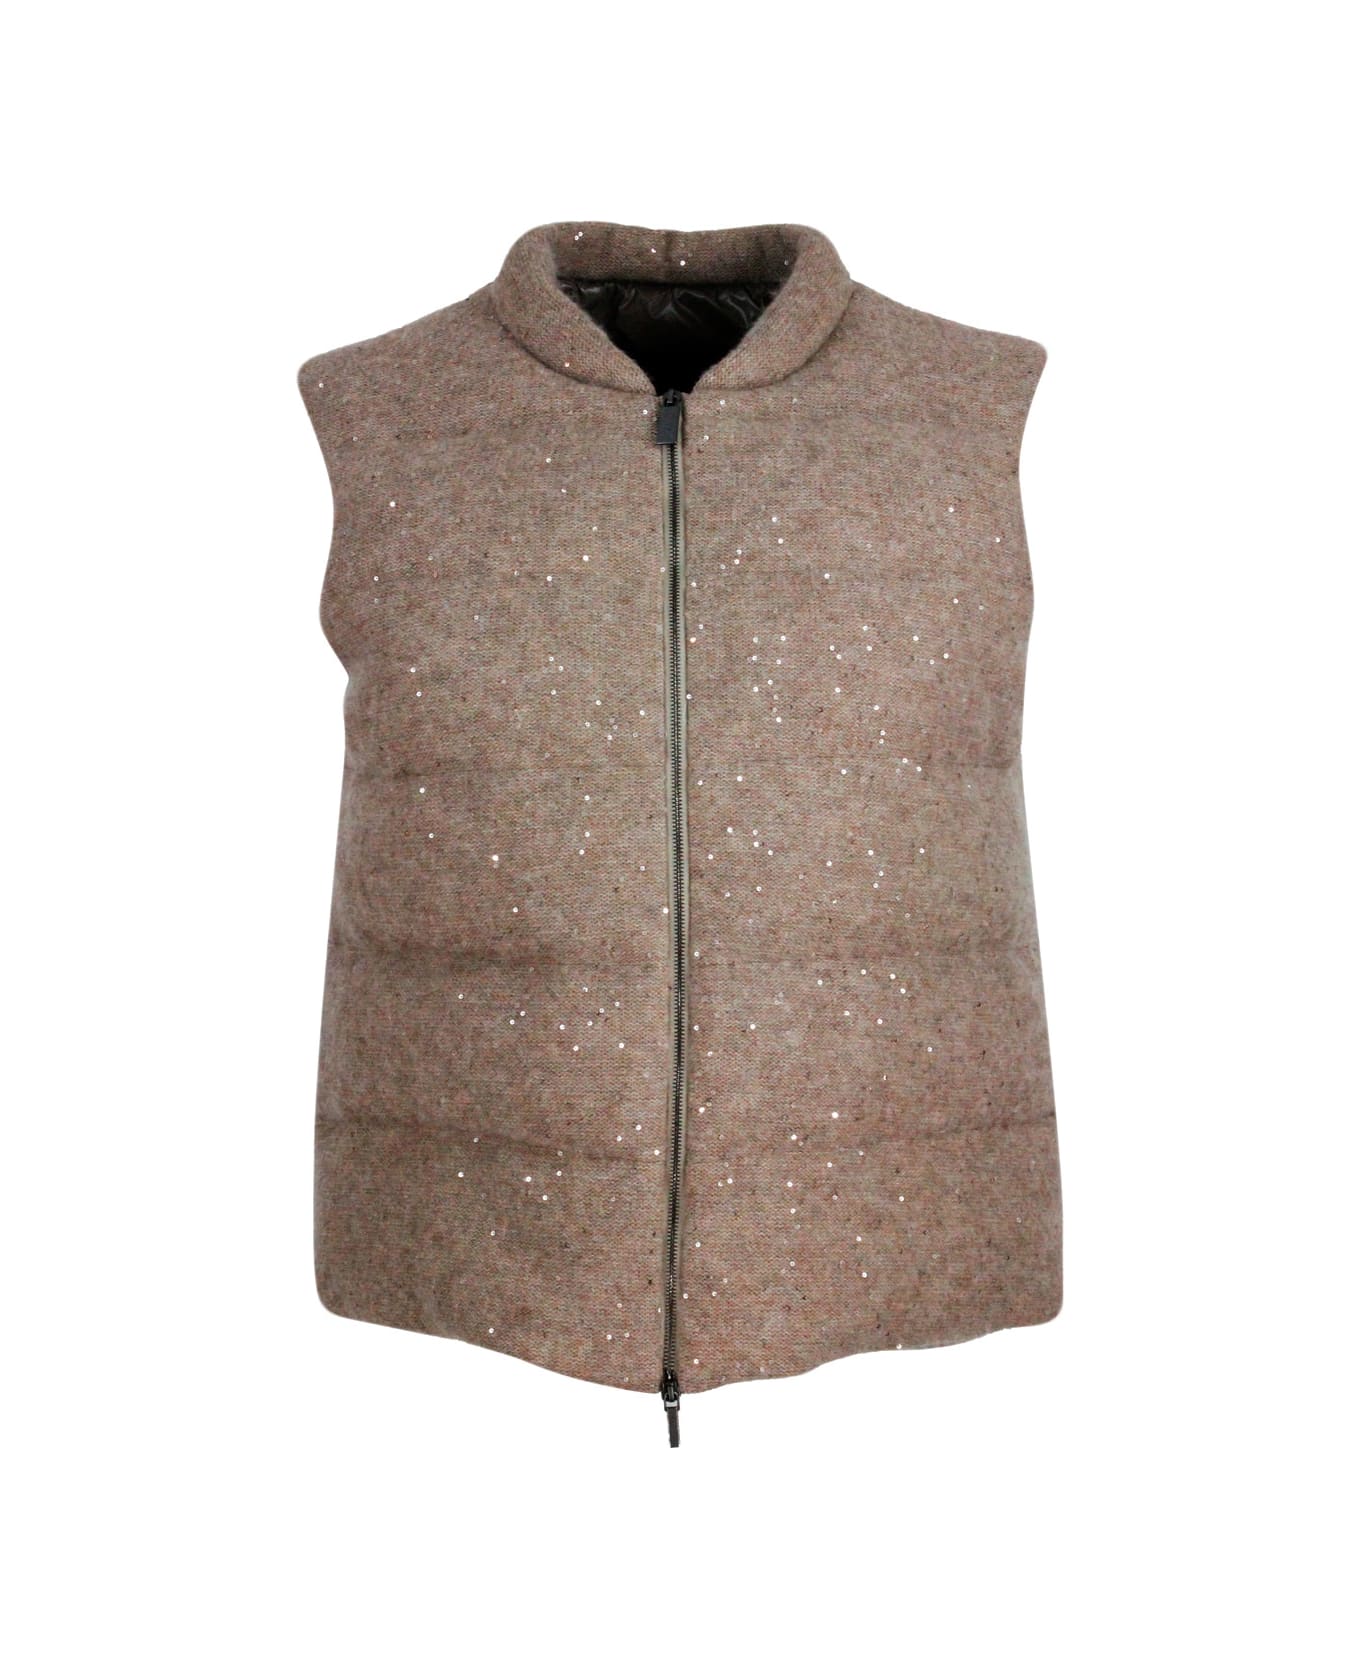 Fabiana Filippi Sleeveless Vest Padded With Real Goose Down In Wool, Silk And Cashmere Embellished With Micro Sequins - Nut ベスト